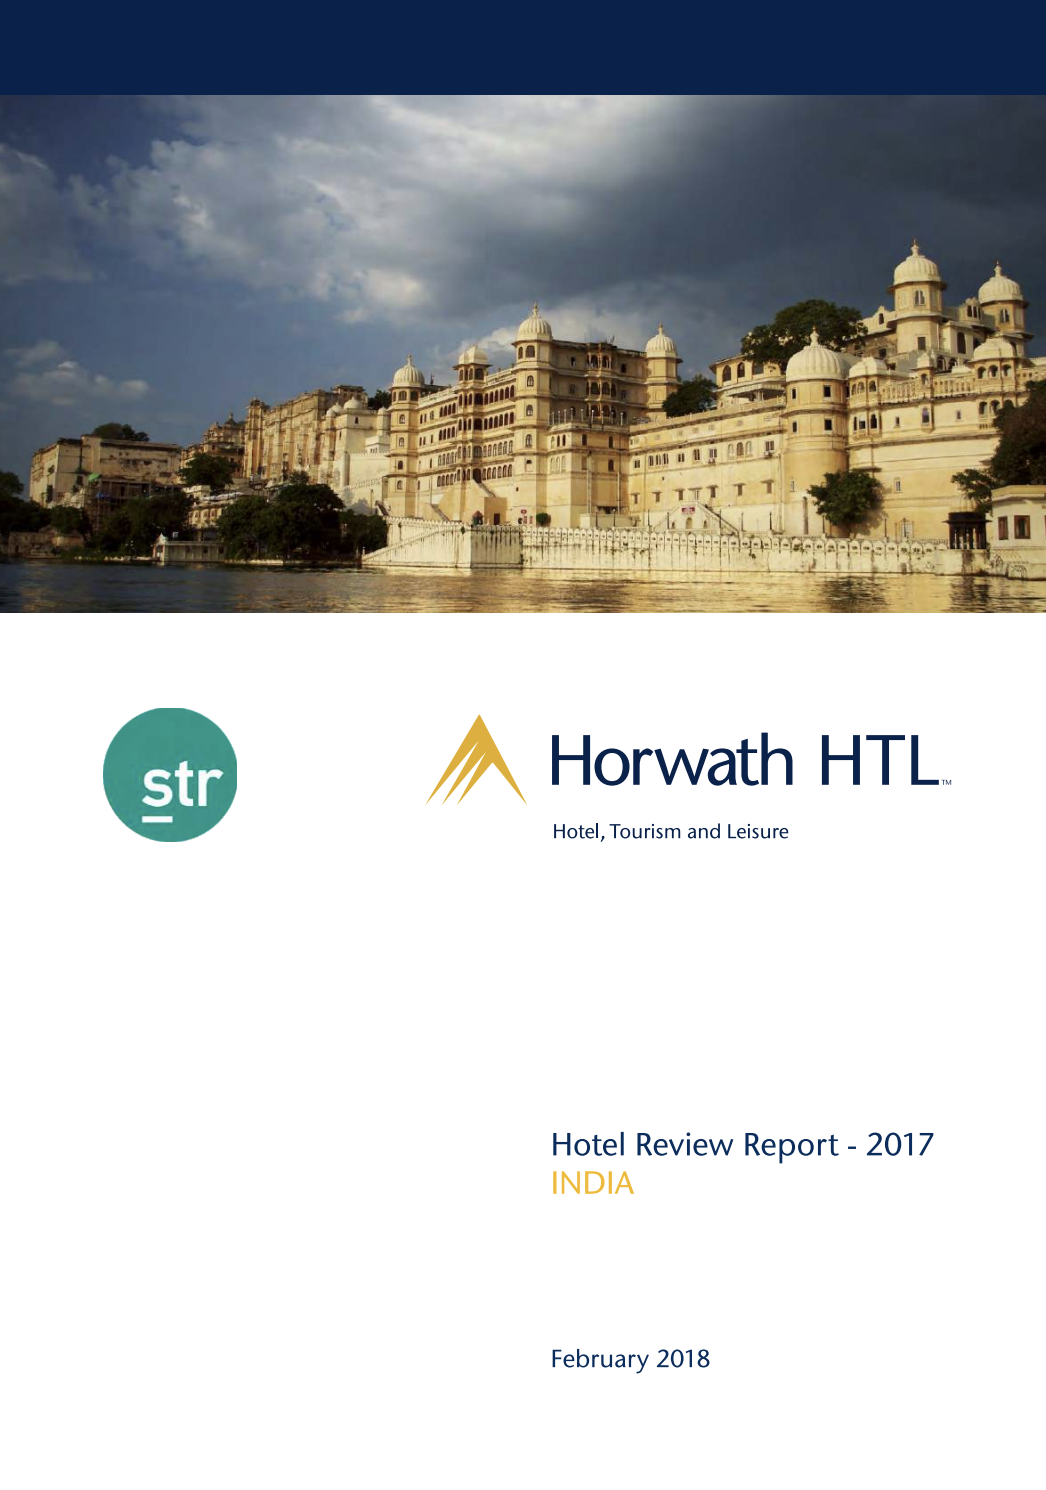 India review report 2017